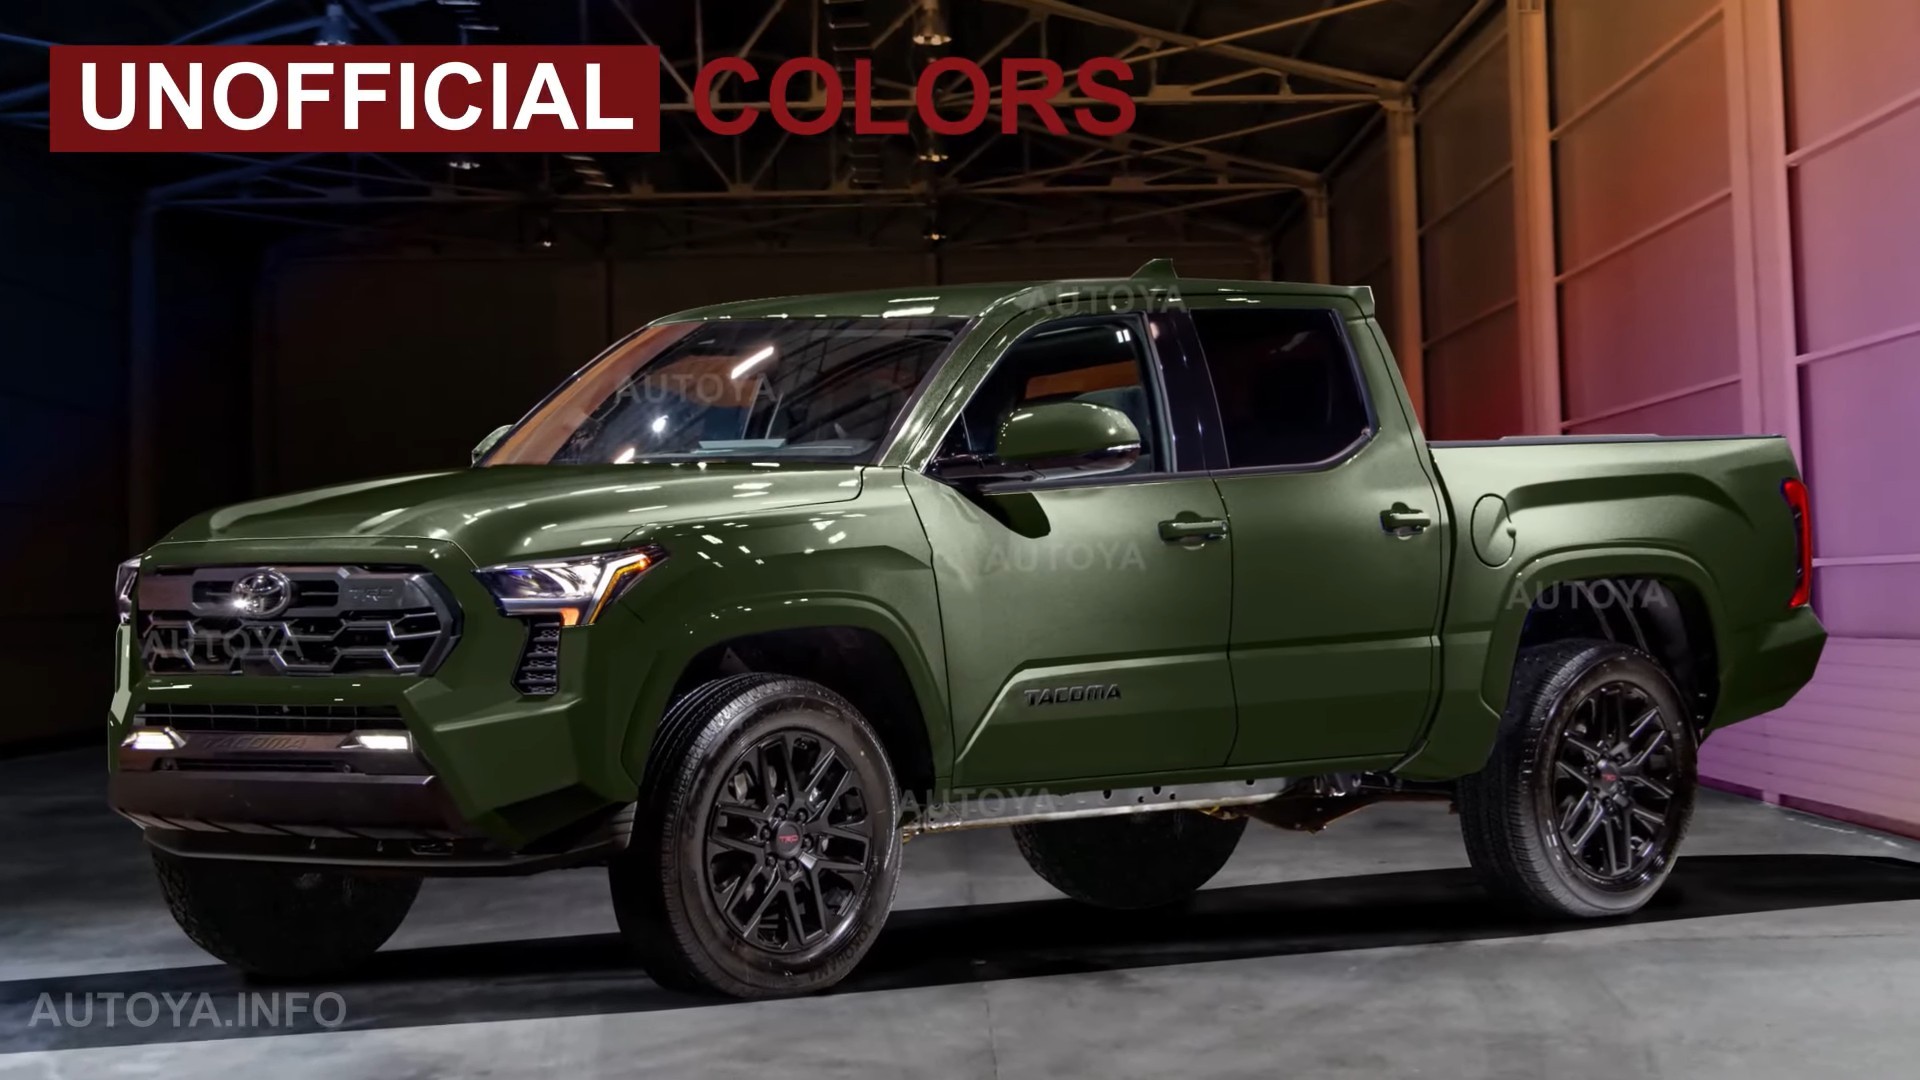 2024 Tacoma 2024 Tacoma TRD Colors Previewed Via CGI Renderings 2024-toyota-tacoma-trd-brandishes-all-juicy-color-options-albeit-only-in-cgi_4